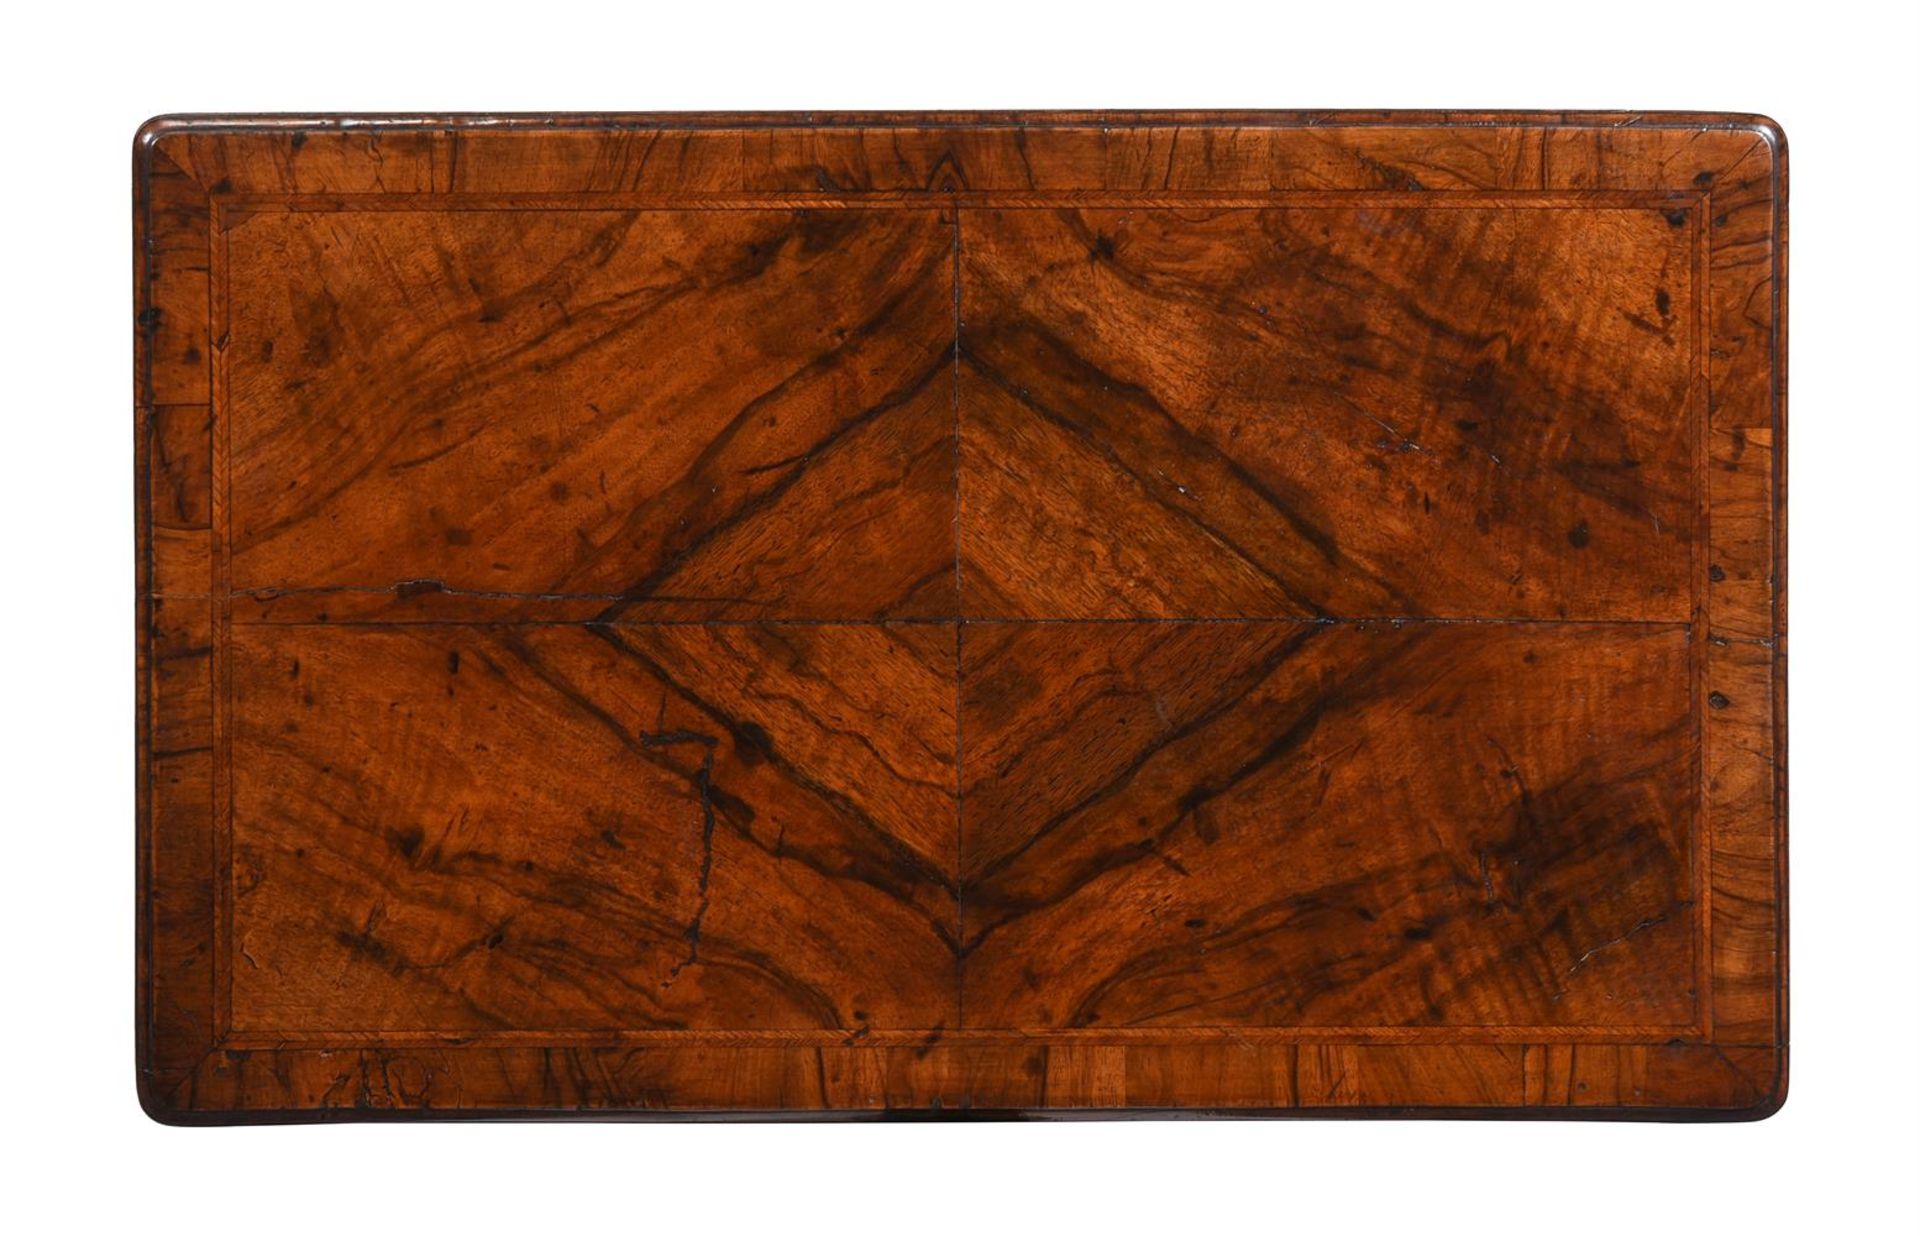 A FINE QUEEN ANNE FIGURED WALNUT SIDE TABLE, CIRCA 1710 - Image 3 of 5